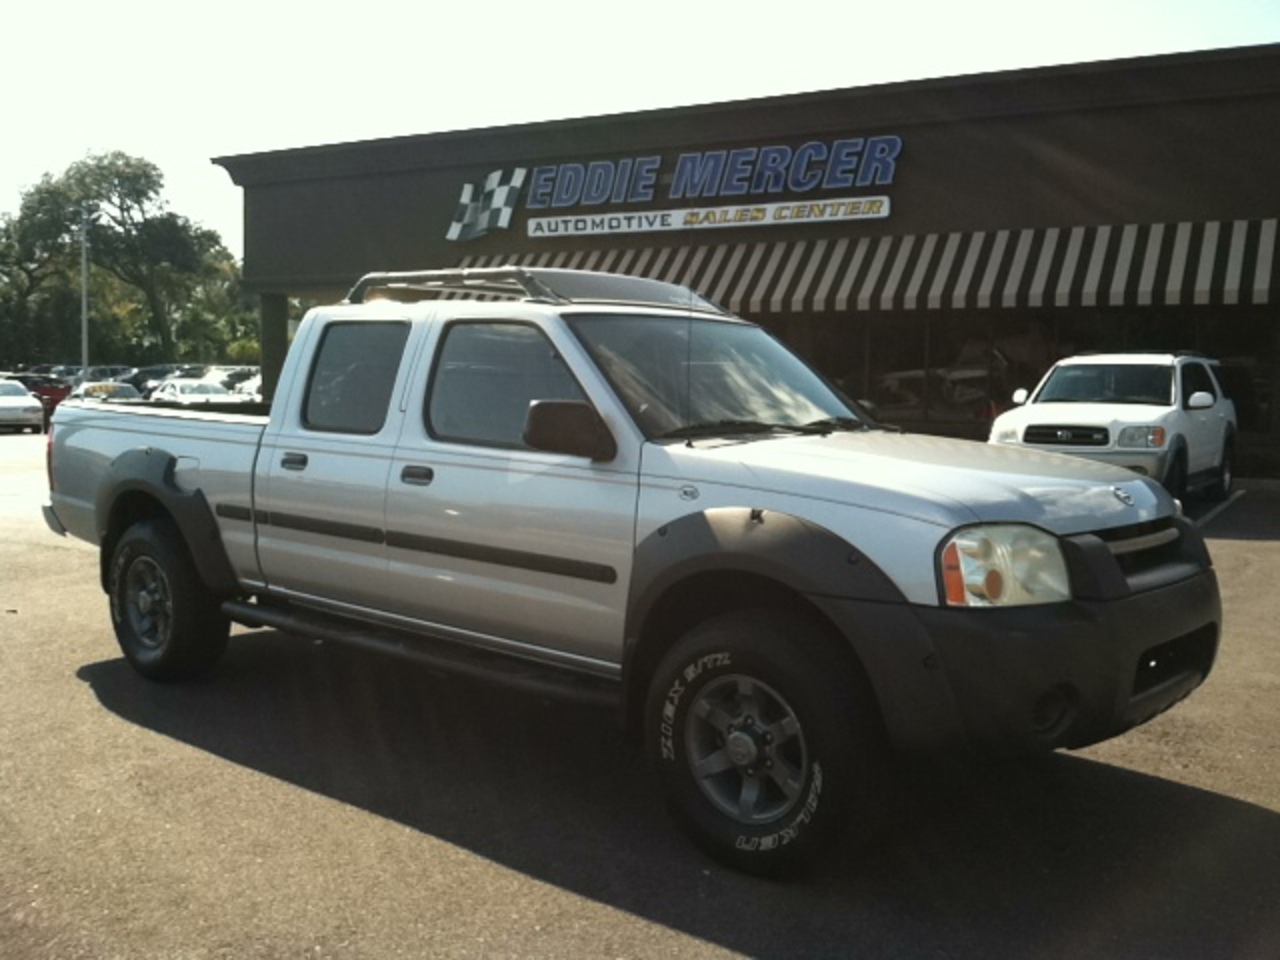 2002 Nissan Frontier XE-V6 Truck Crew Cab | Flickr - Photo Sharing!